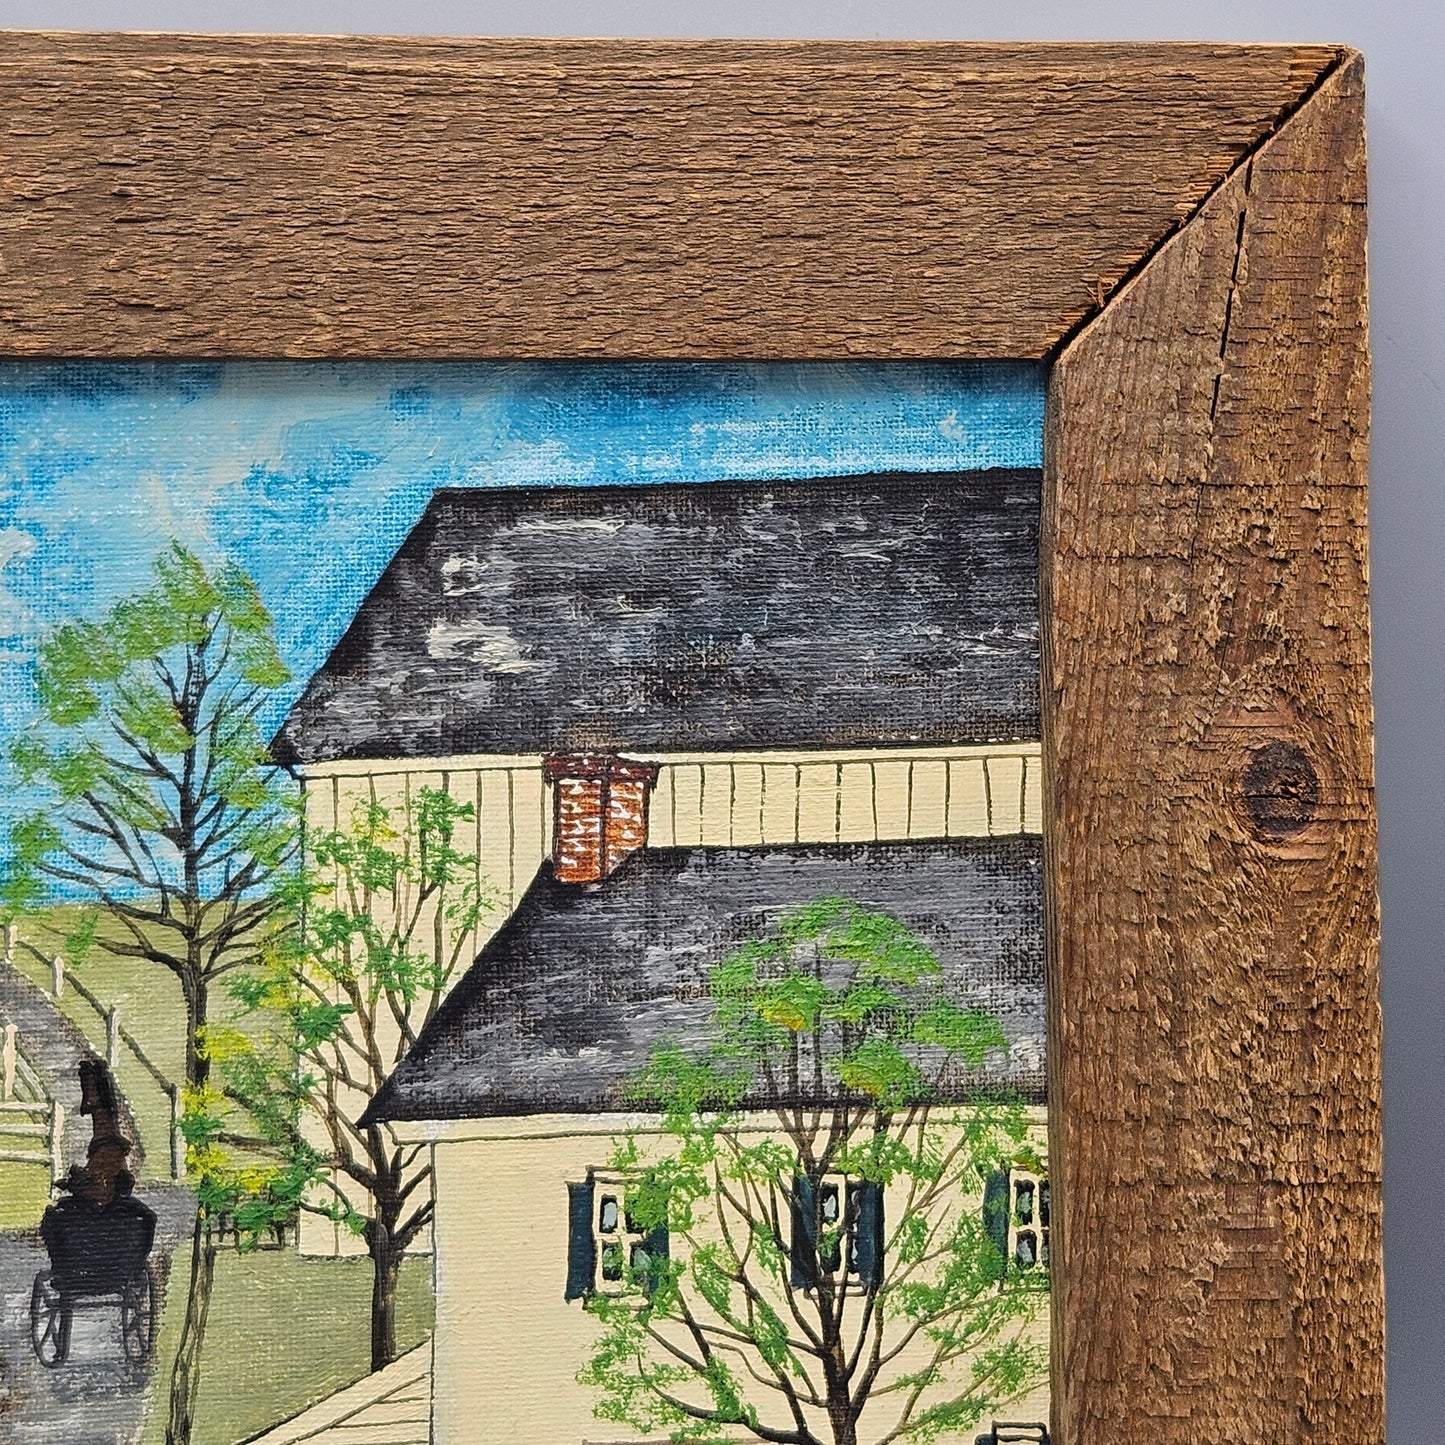 Vintage Signed Dolores Hackenberger Painting of Amish Schoolyard on Board